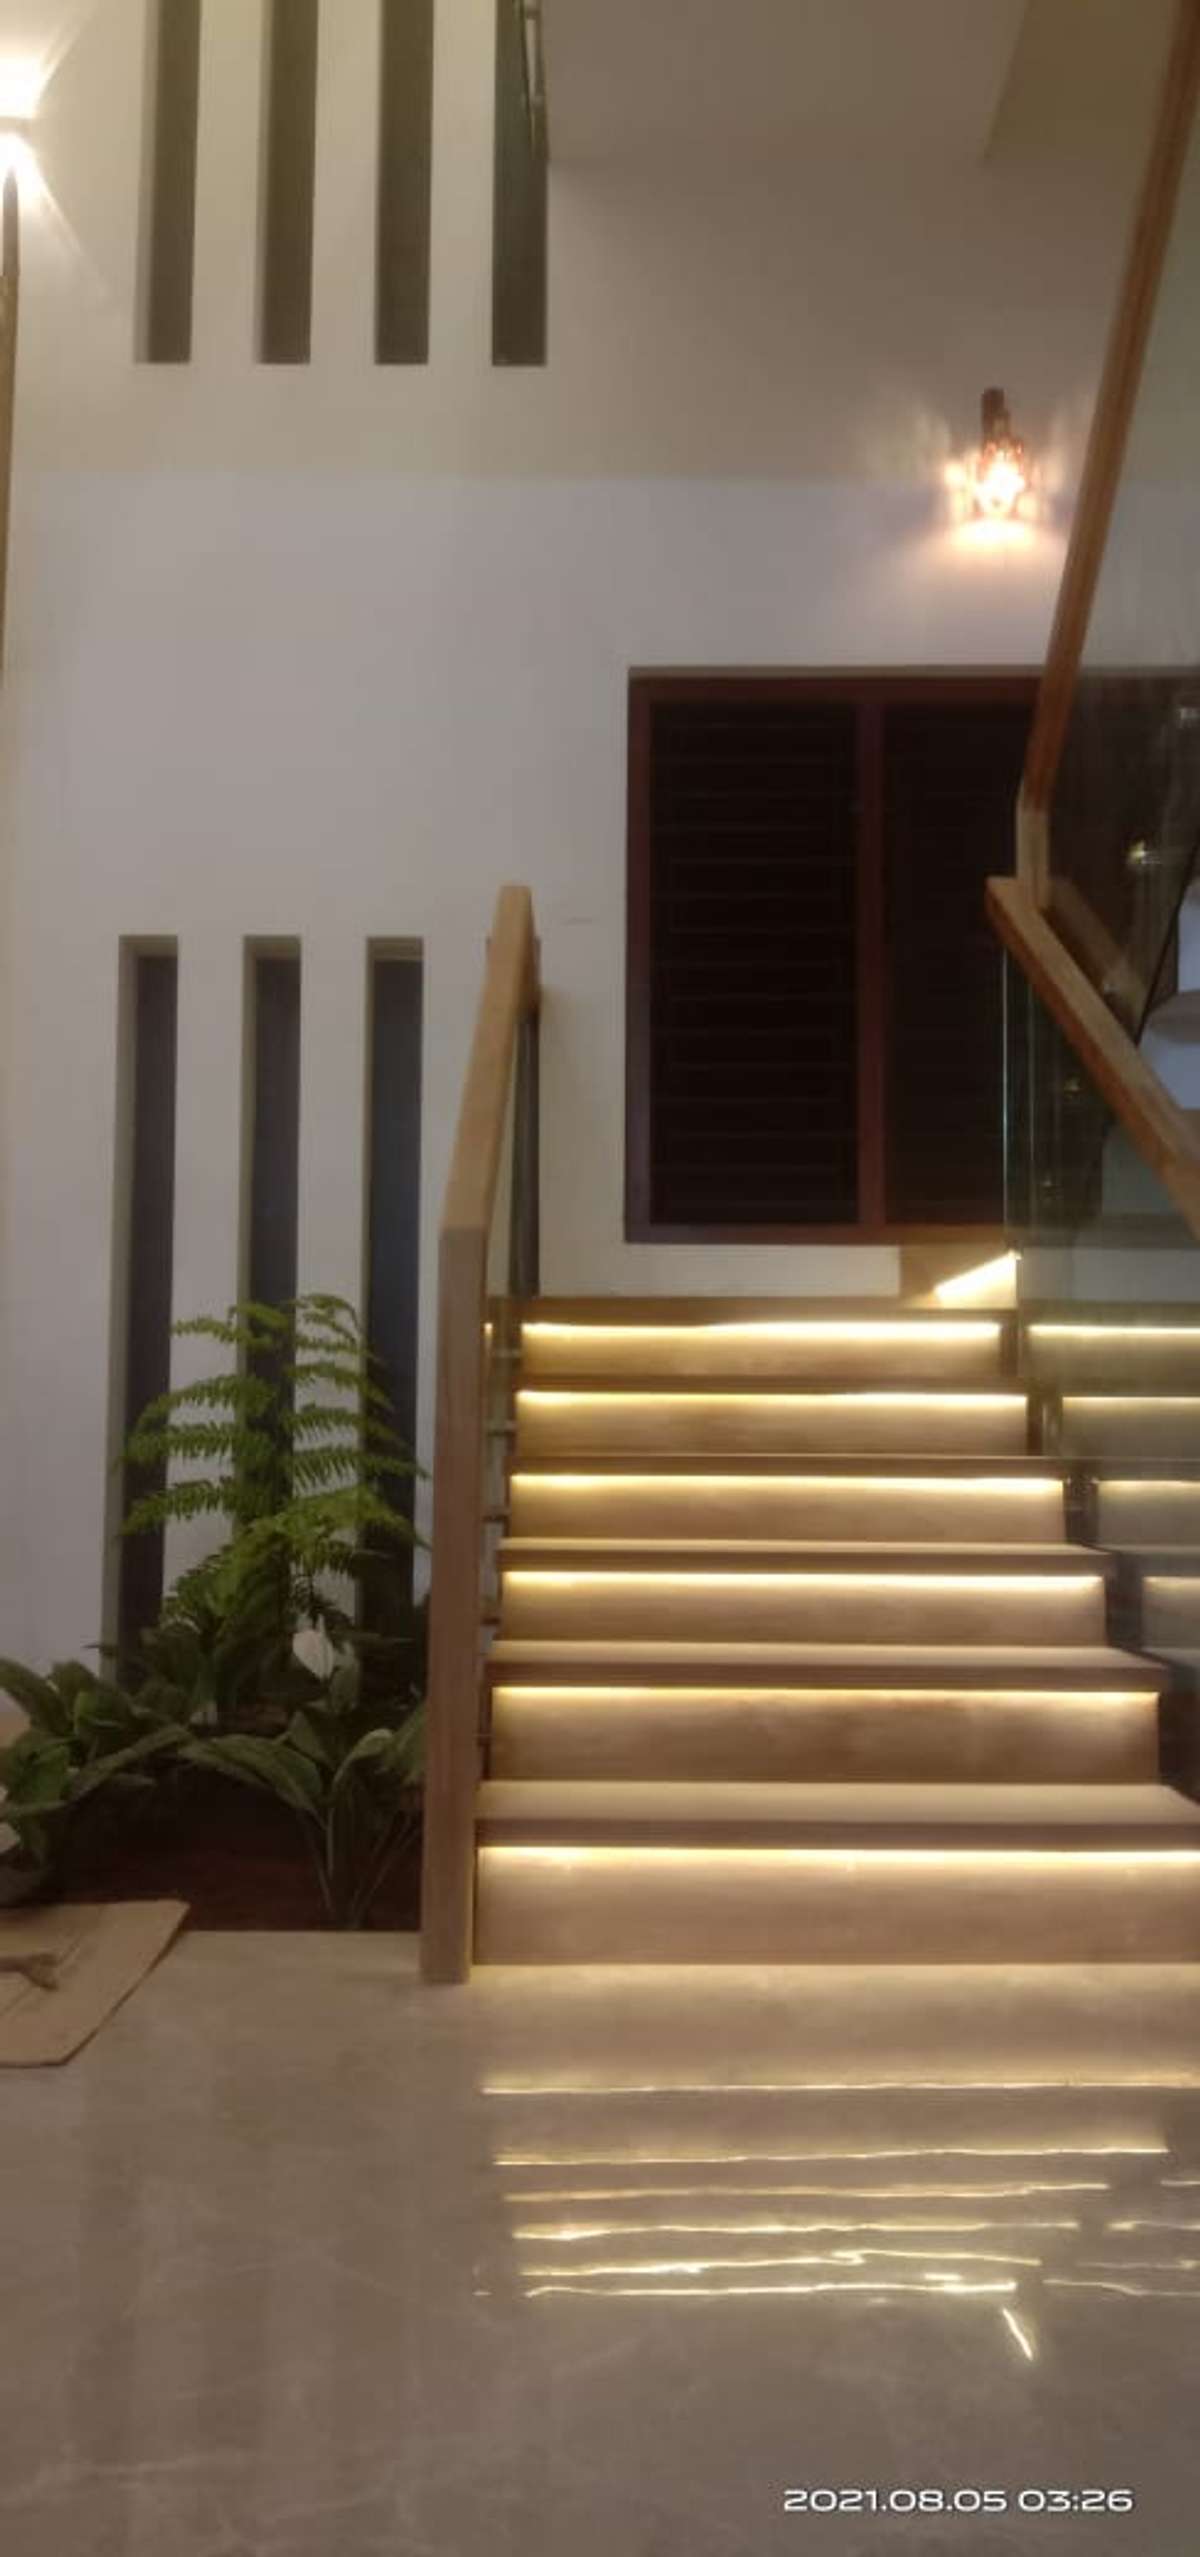 Flooring, Staircase, Lighting, Wall Designs by Painting Works Harshad Harz, Kozhikode | Kolo